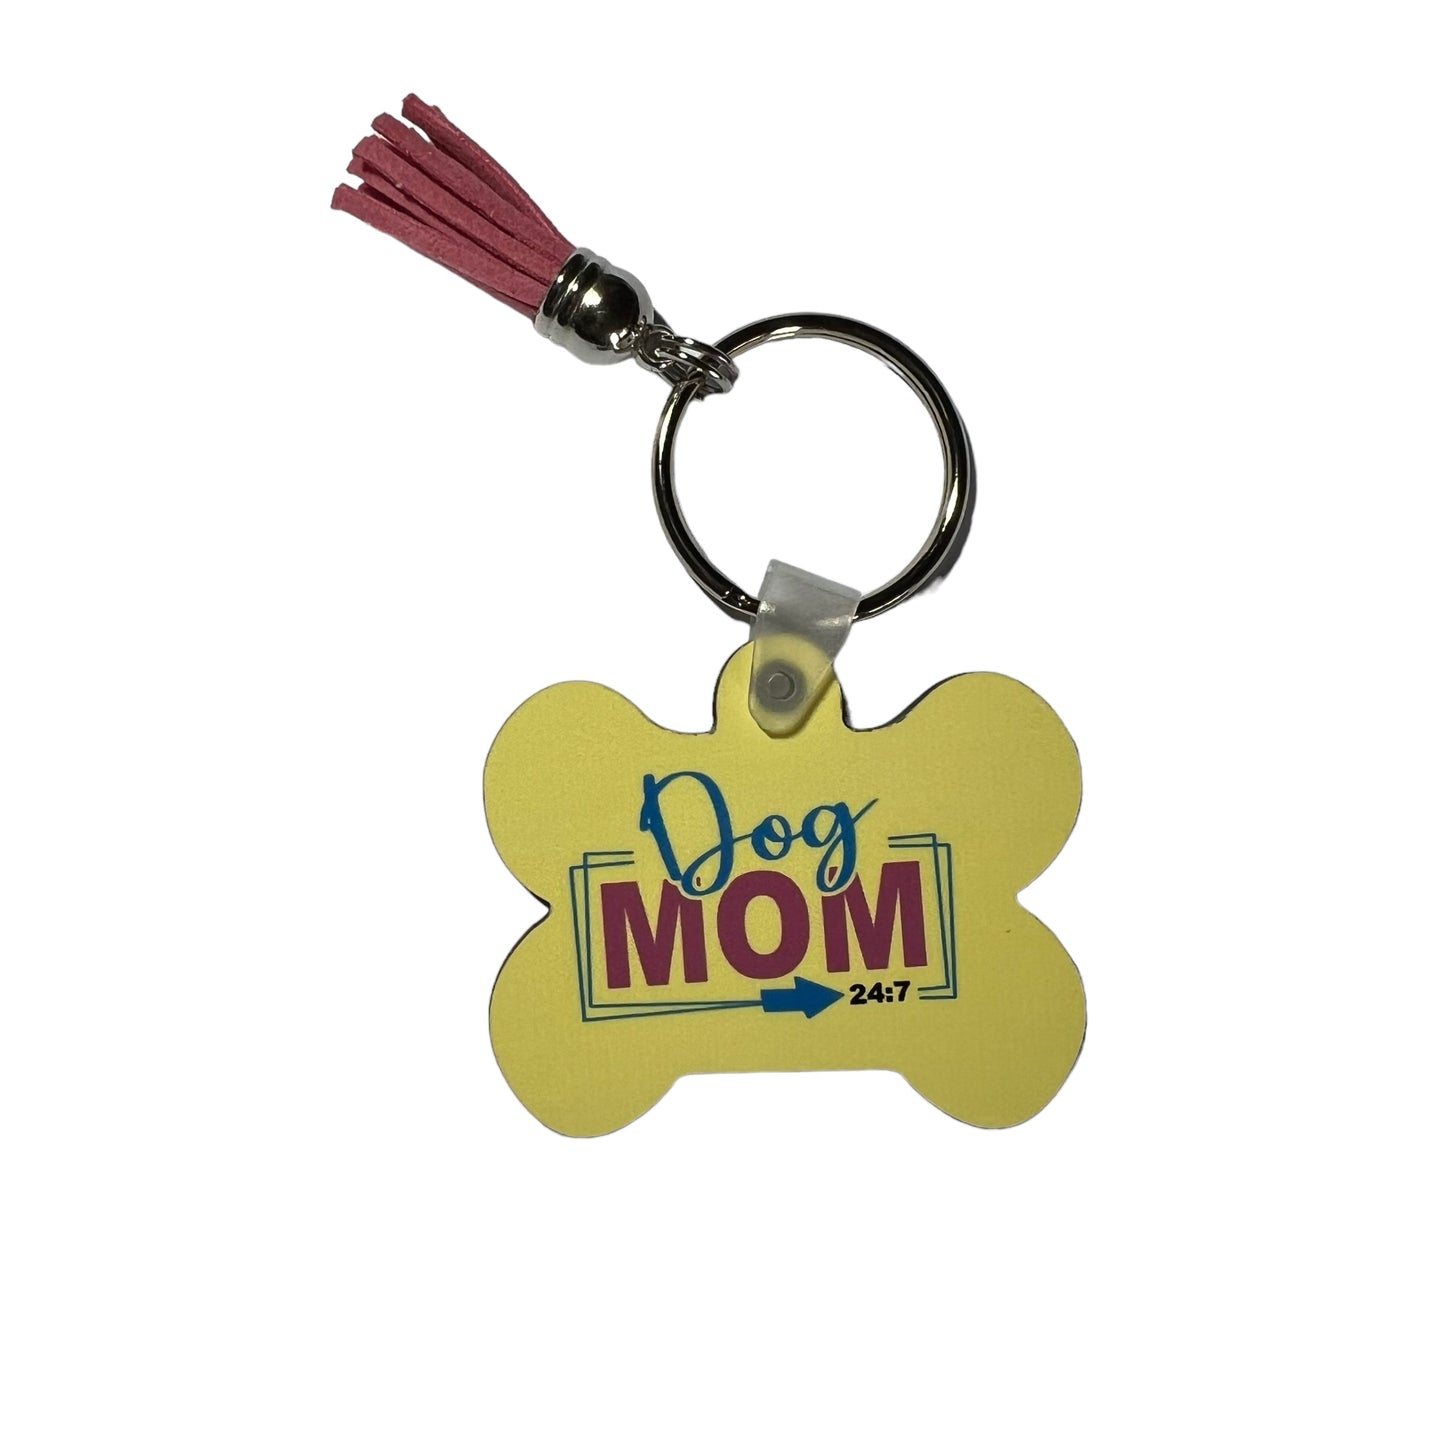 JenDore Dog Mom 24:7 Handcrafted Yellow Blue Pink Bone-Shaped Keychain: A Tribute to Fur-ever Love